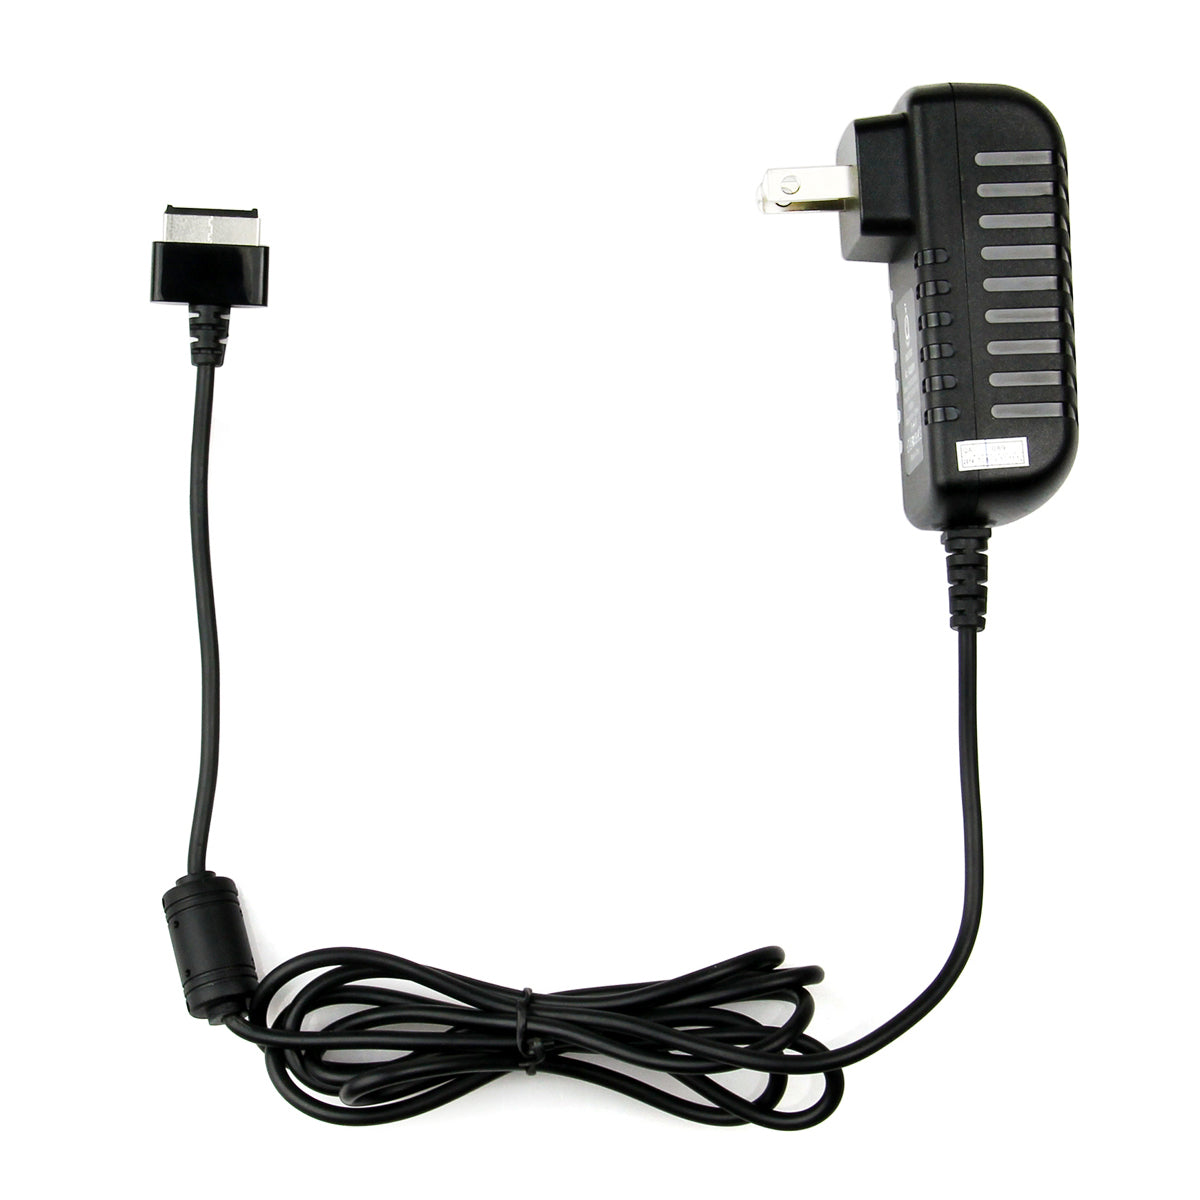 AC Adapter Charger for ASUS TF201 B1 Eee Pad.